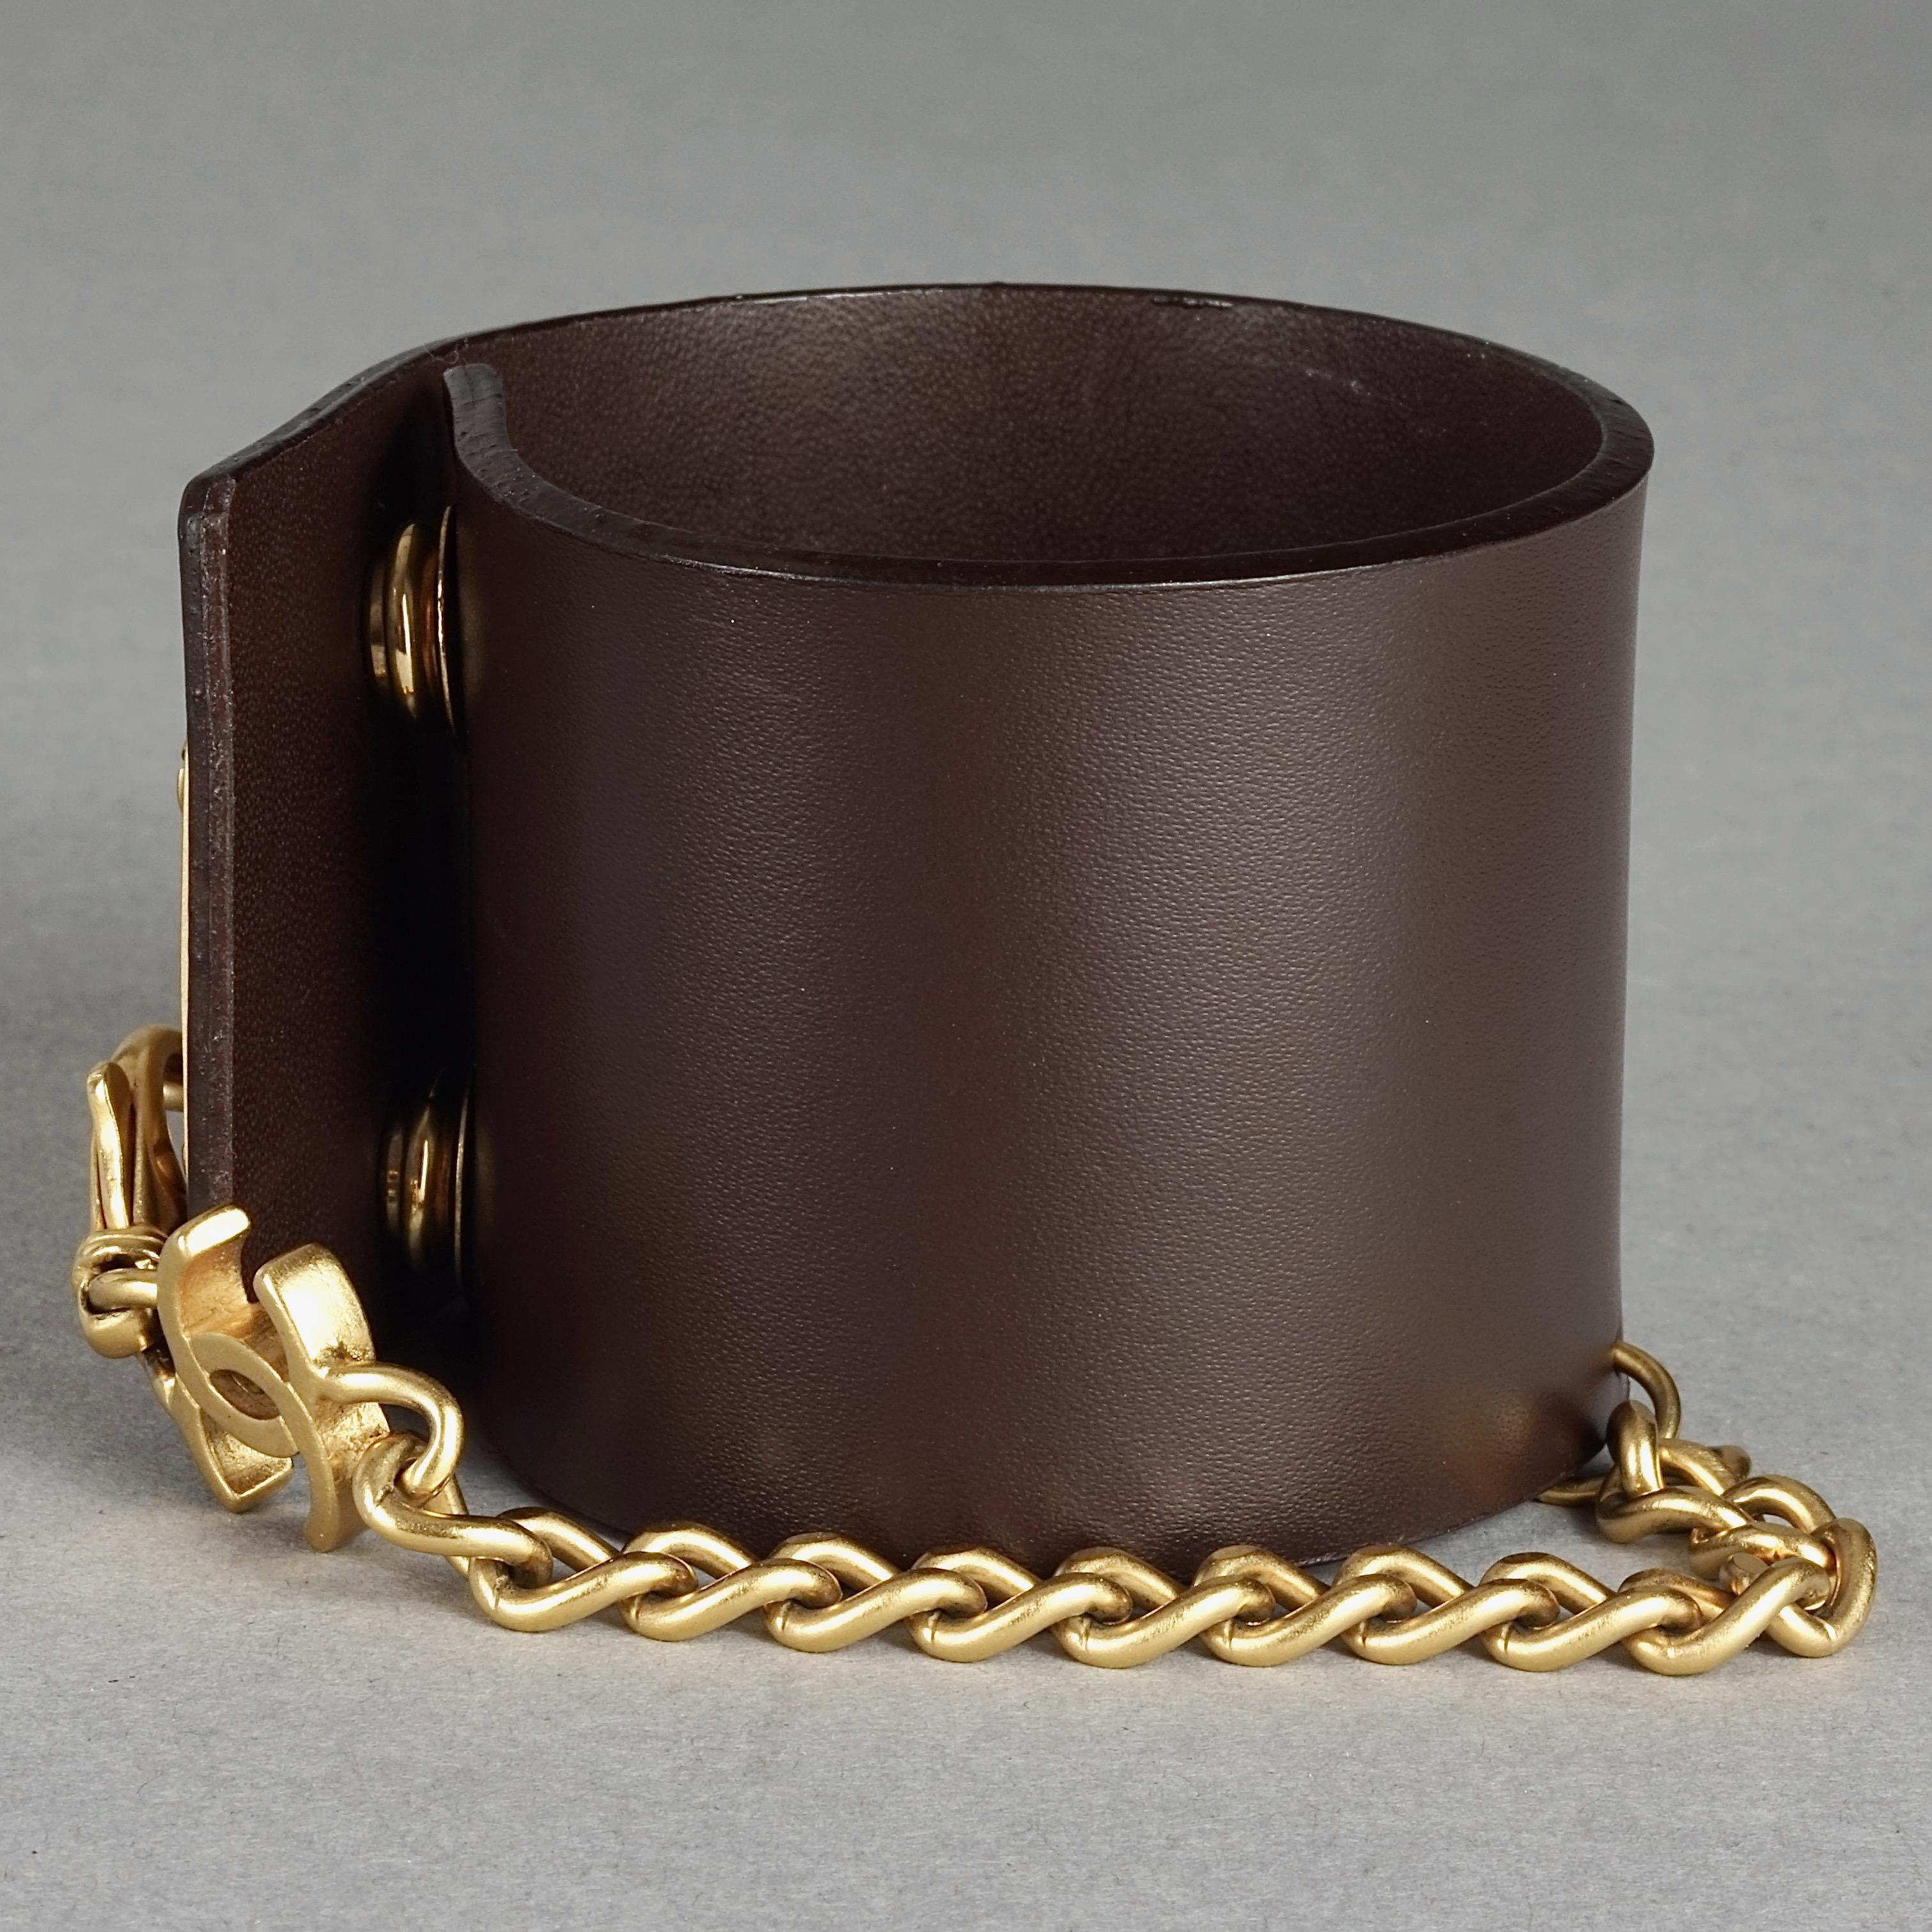 CHANEL Logo Chain Brown Leather Cuff Bracelet Spring 2003 In Excellent Condition For Sale In Kingersheim, Alsace